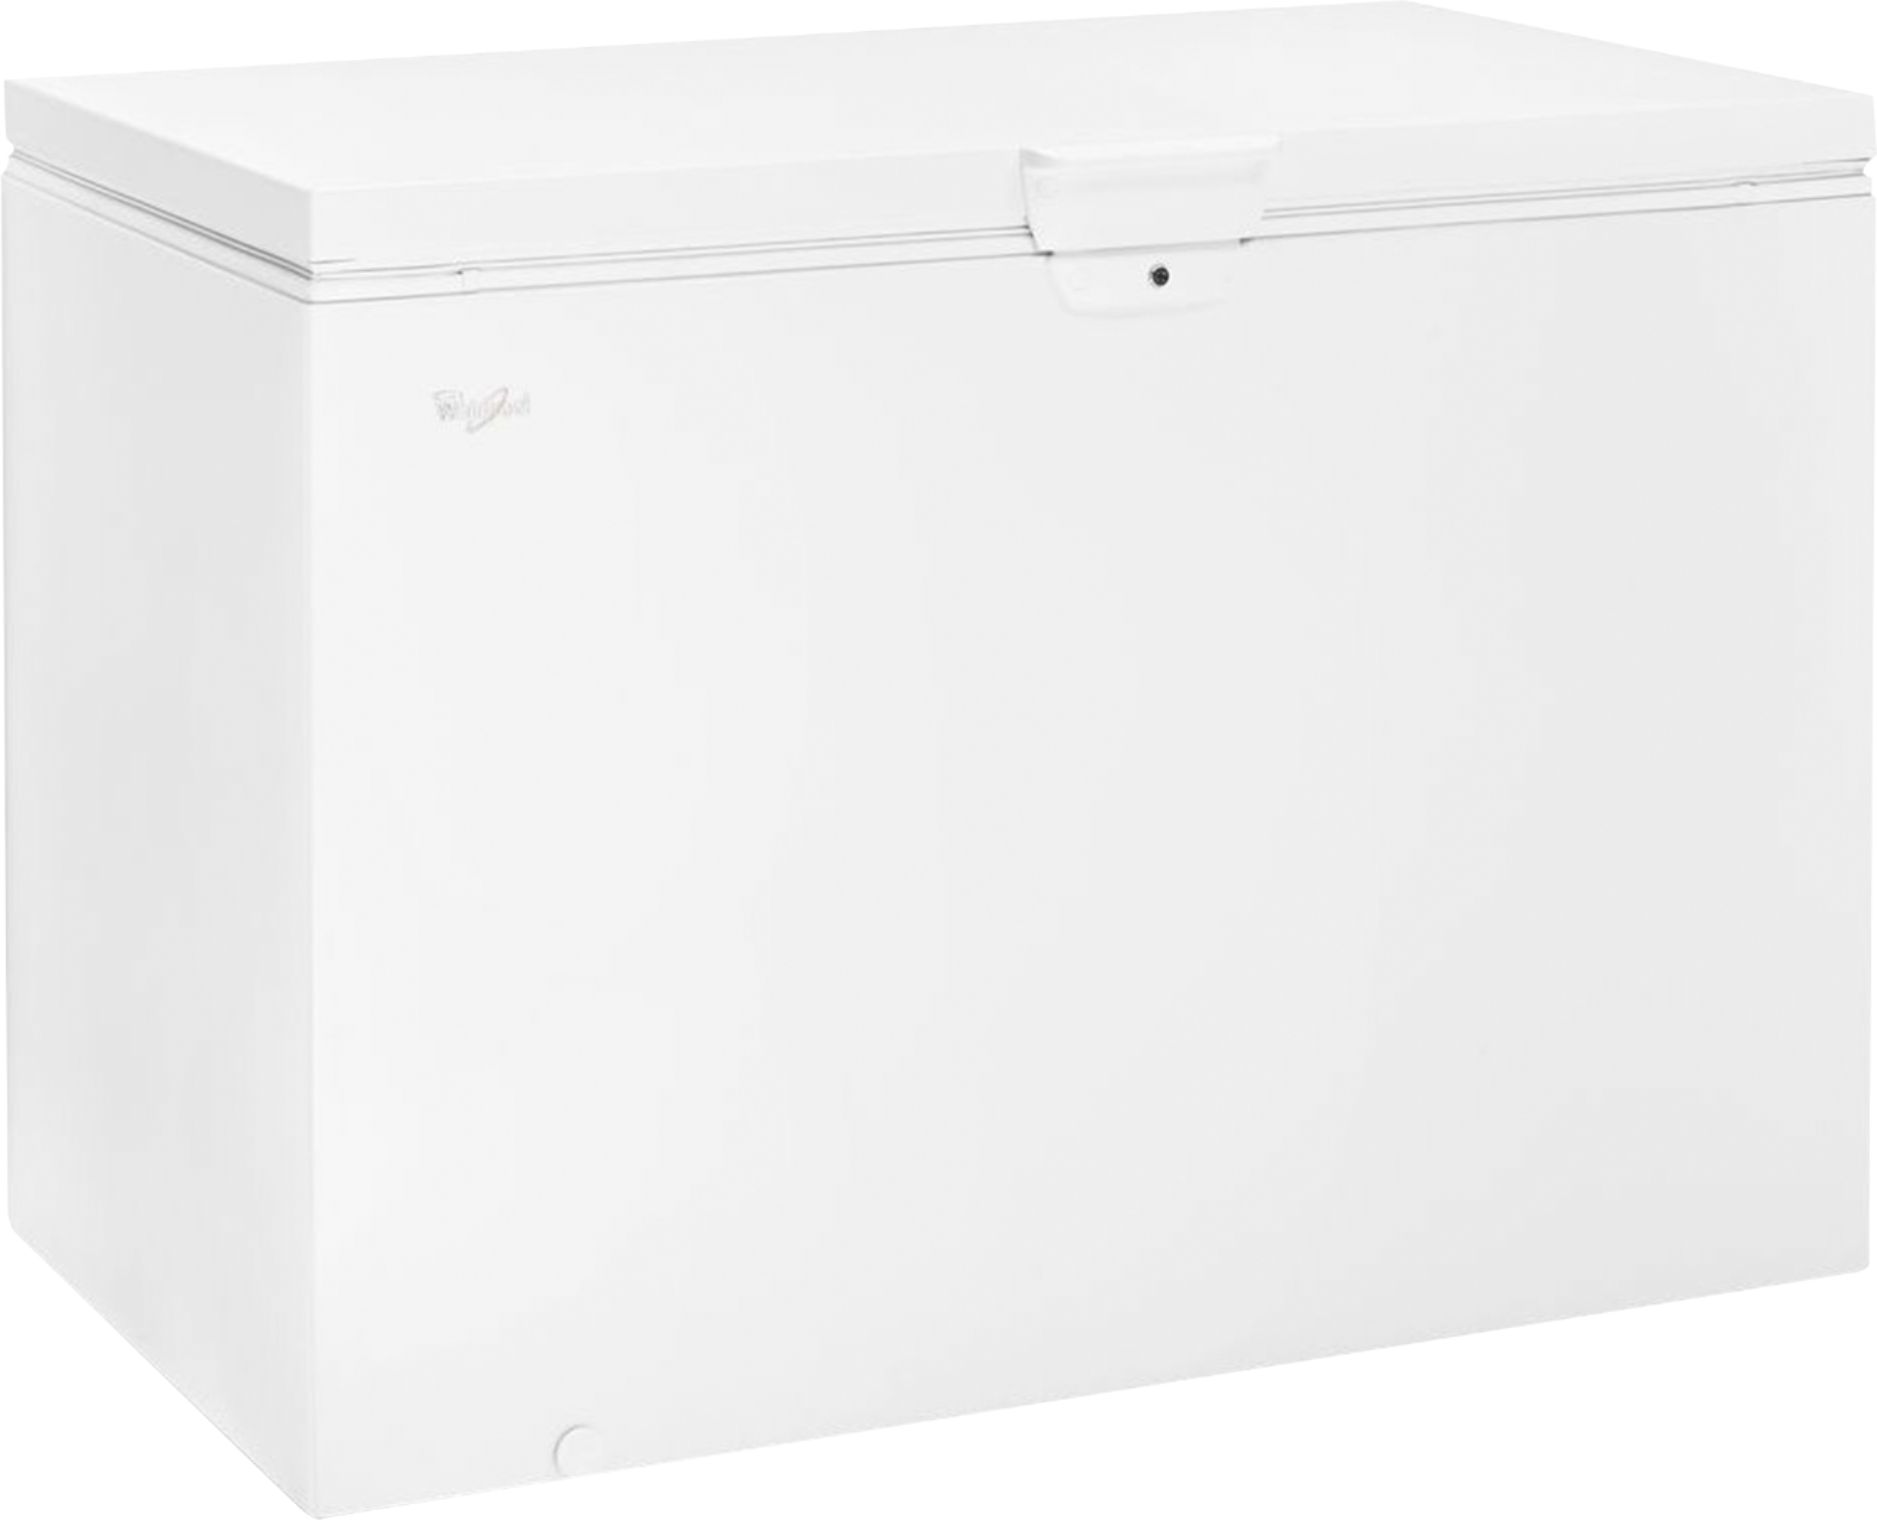 Angle View: 5.5 Cu. ft Chest Freezer